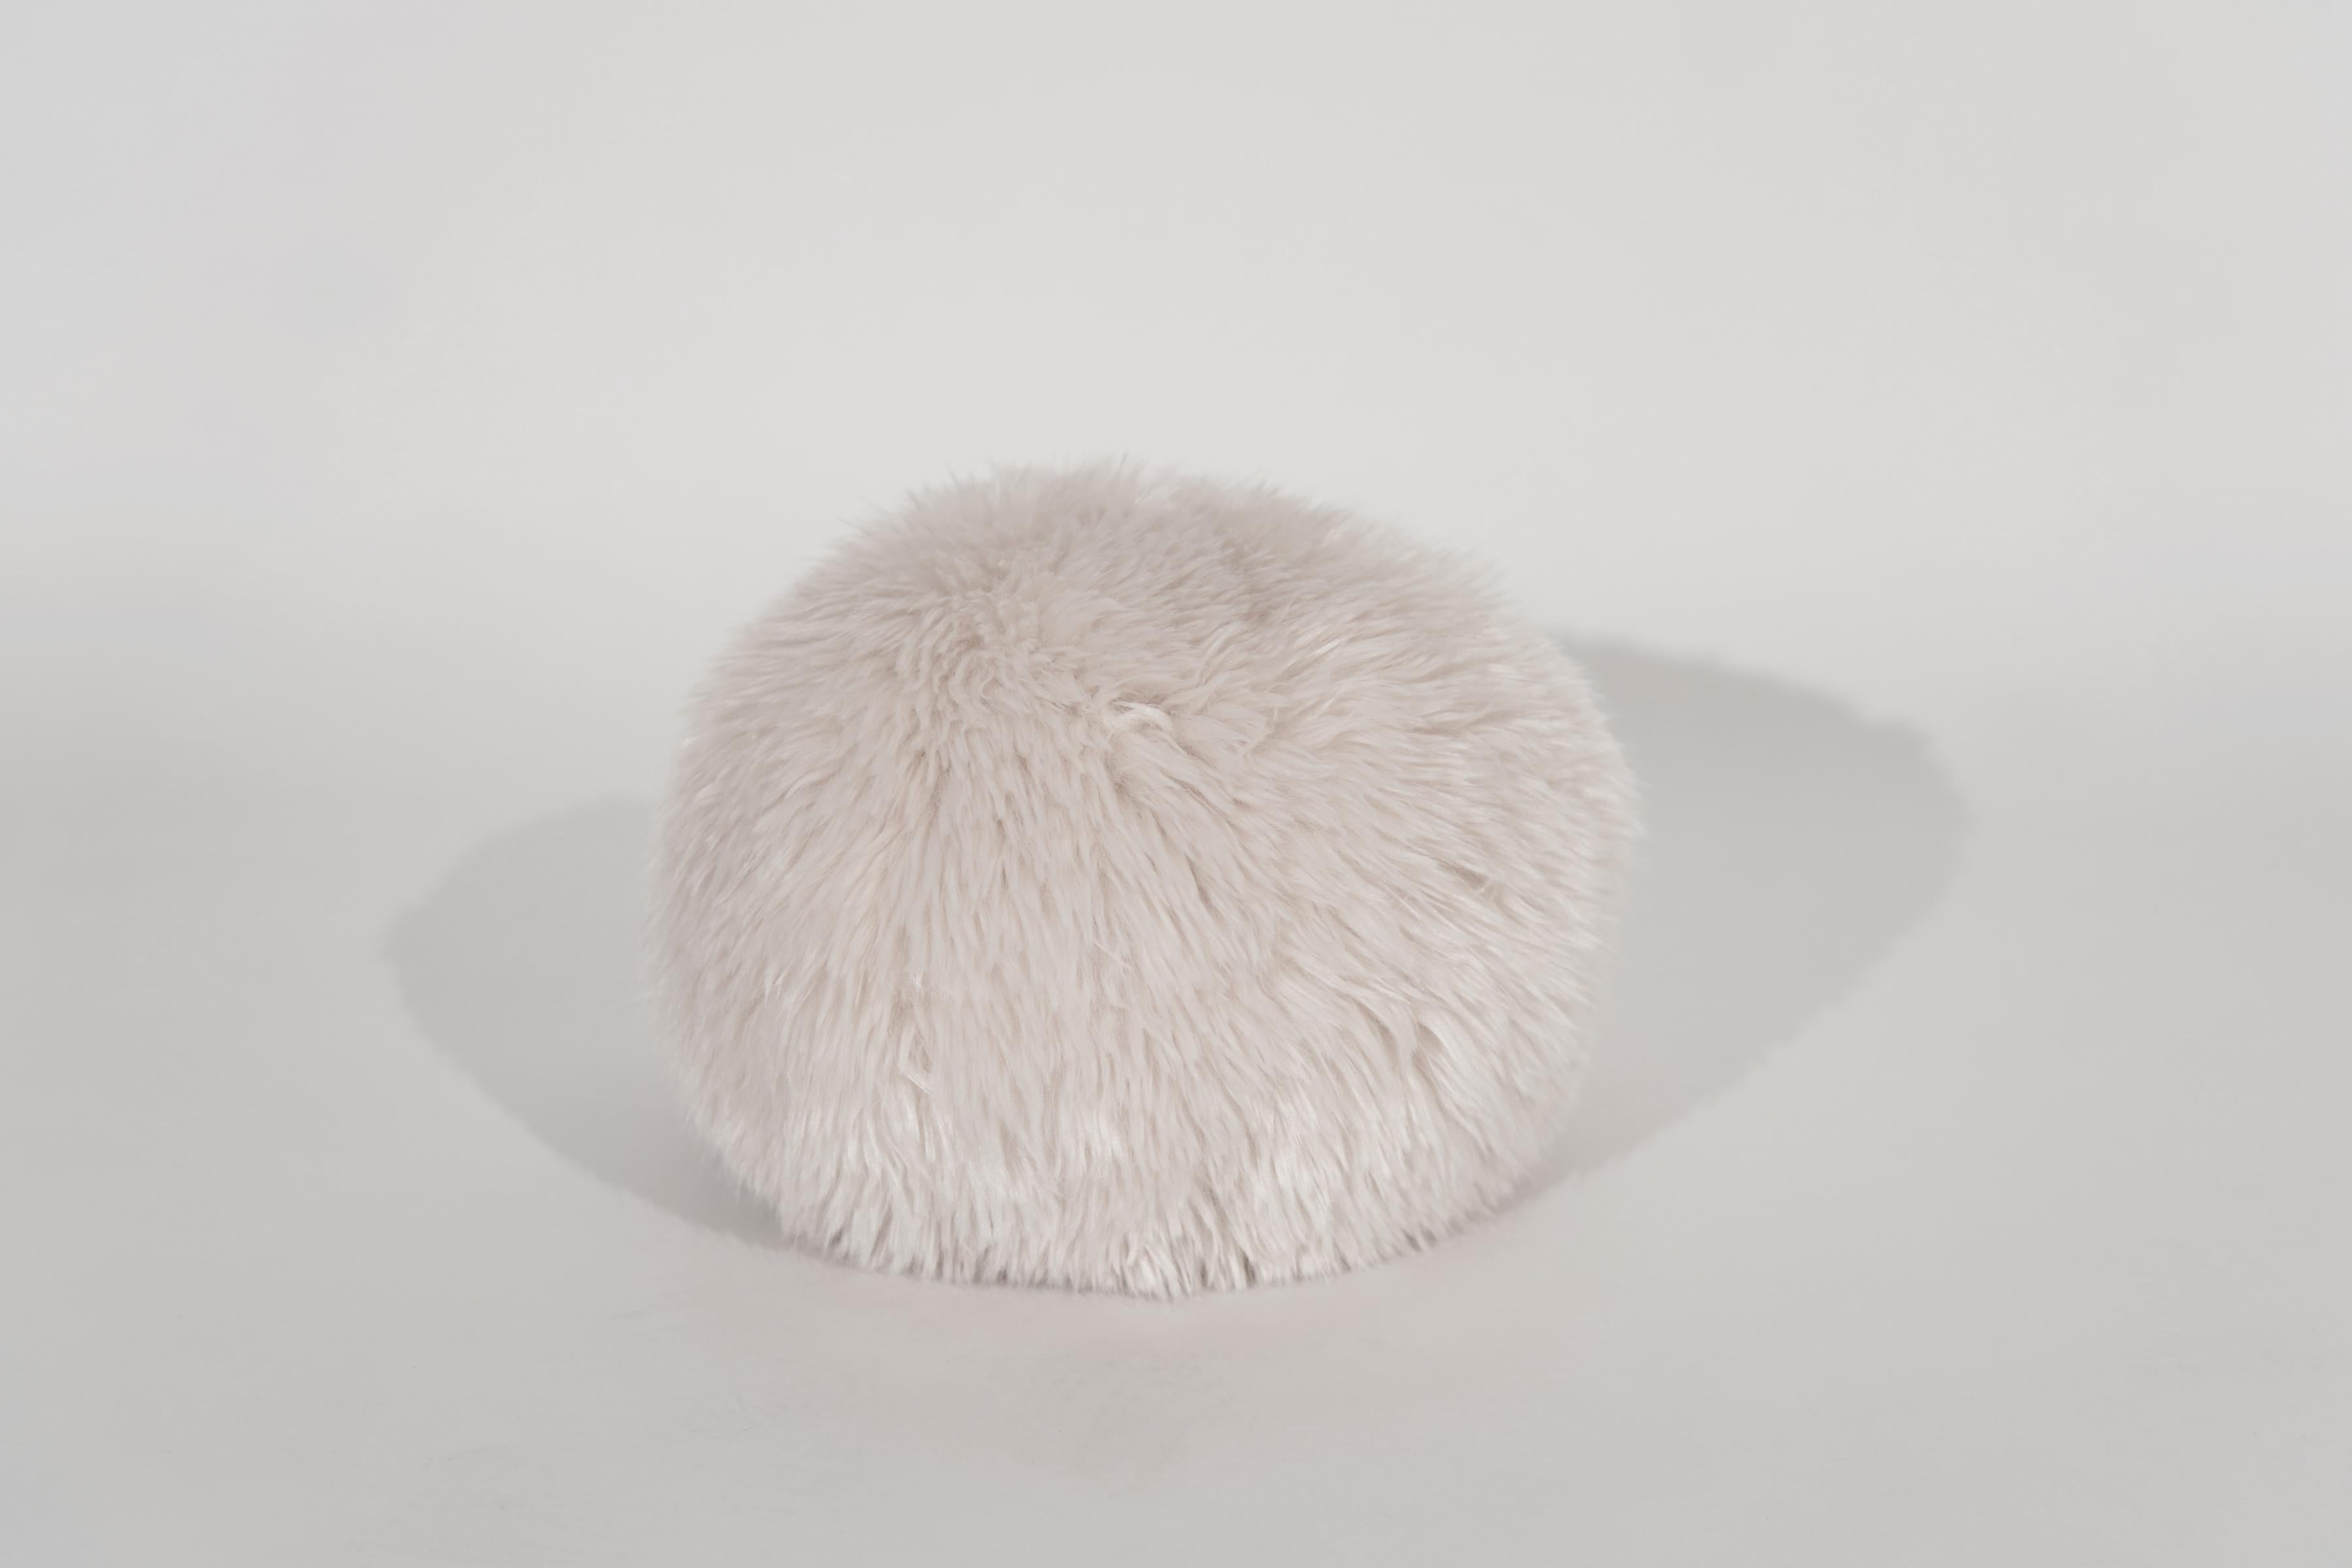 Center your space with a softer aesthetic. The Orb Pillow is a calming take on geometric trends, and it’s the perfect accessory for Mid-Century Modern furniture. Balance the sweeping curves and delicate lines of your sofa or chaise with a plush,